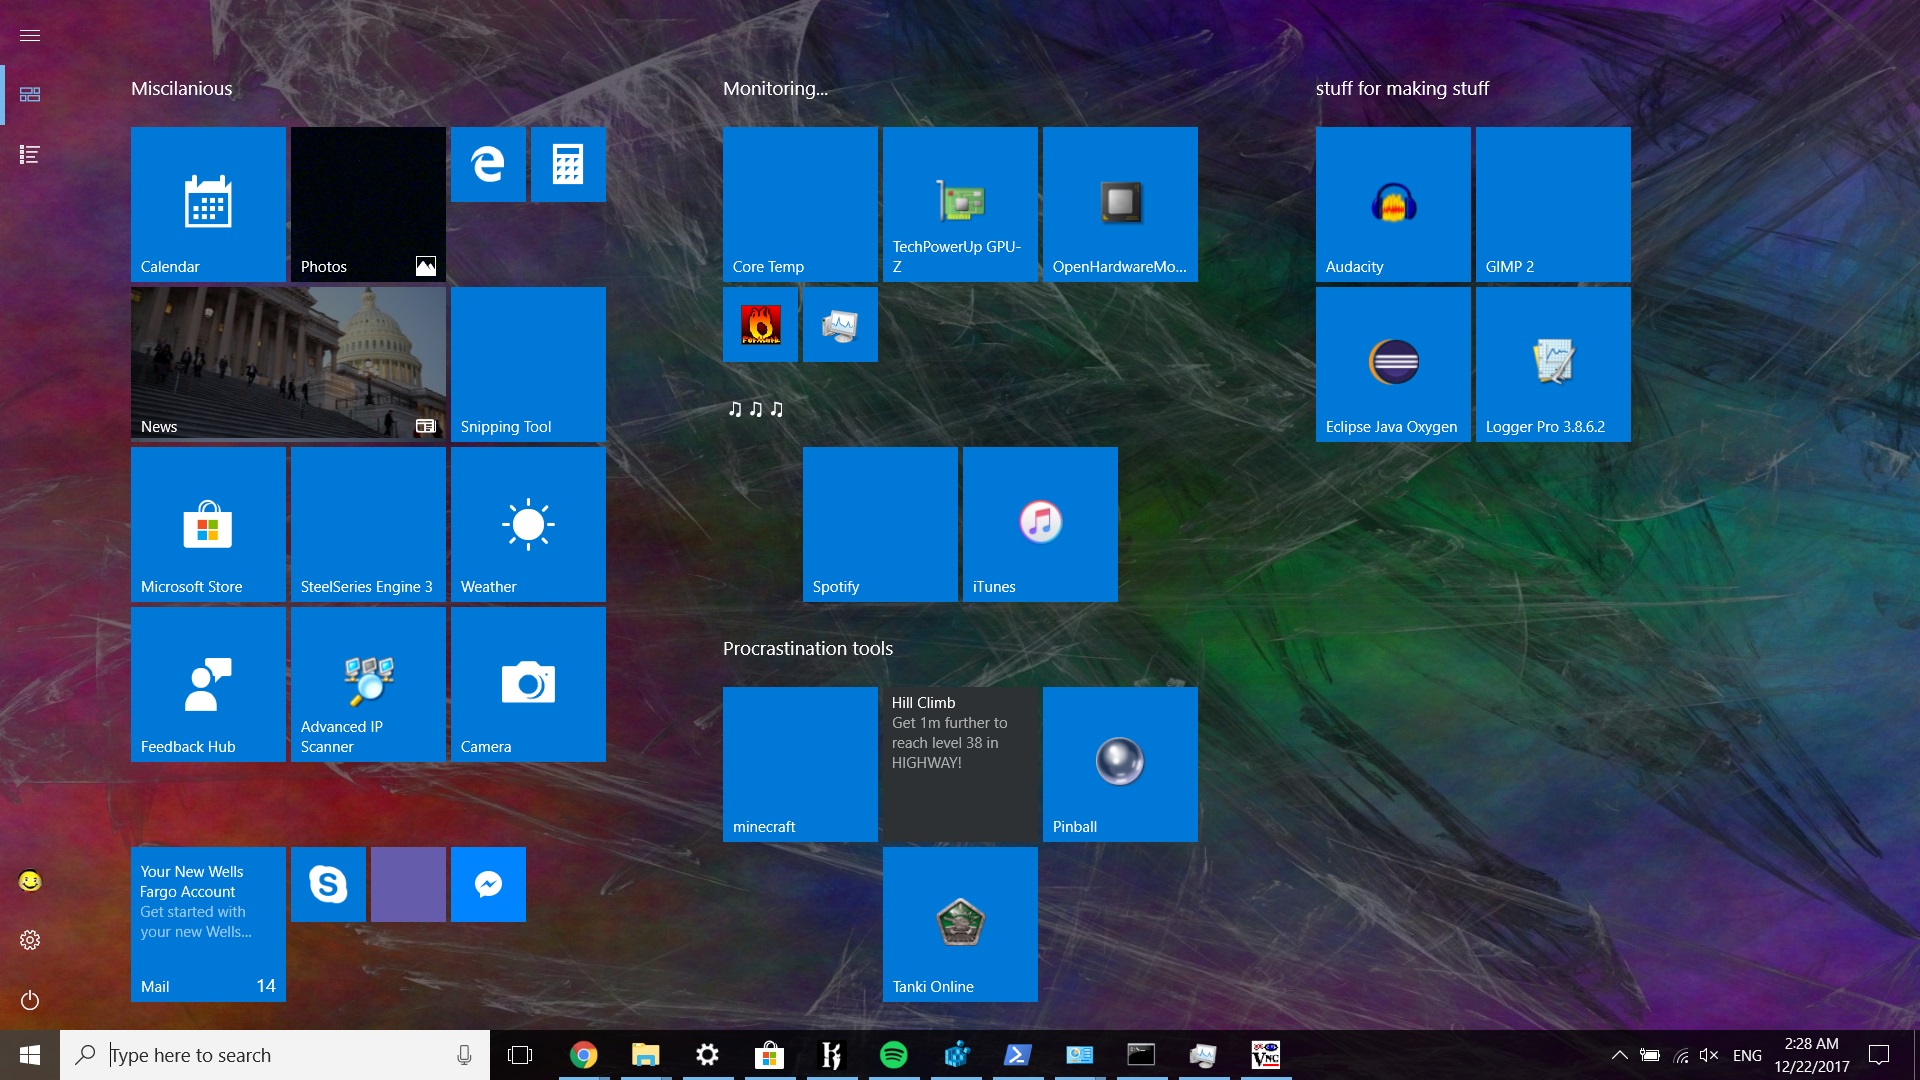 Start Menu Tiles Intermittently Gitch And Overlap - Temporarily Fixed by Rebooting U2Vvv.jpg